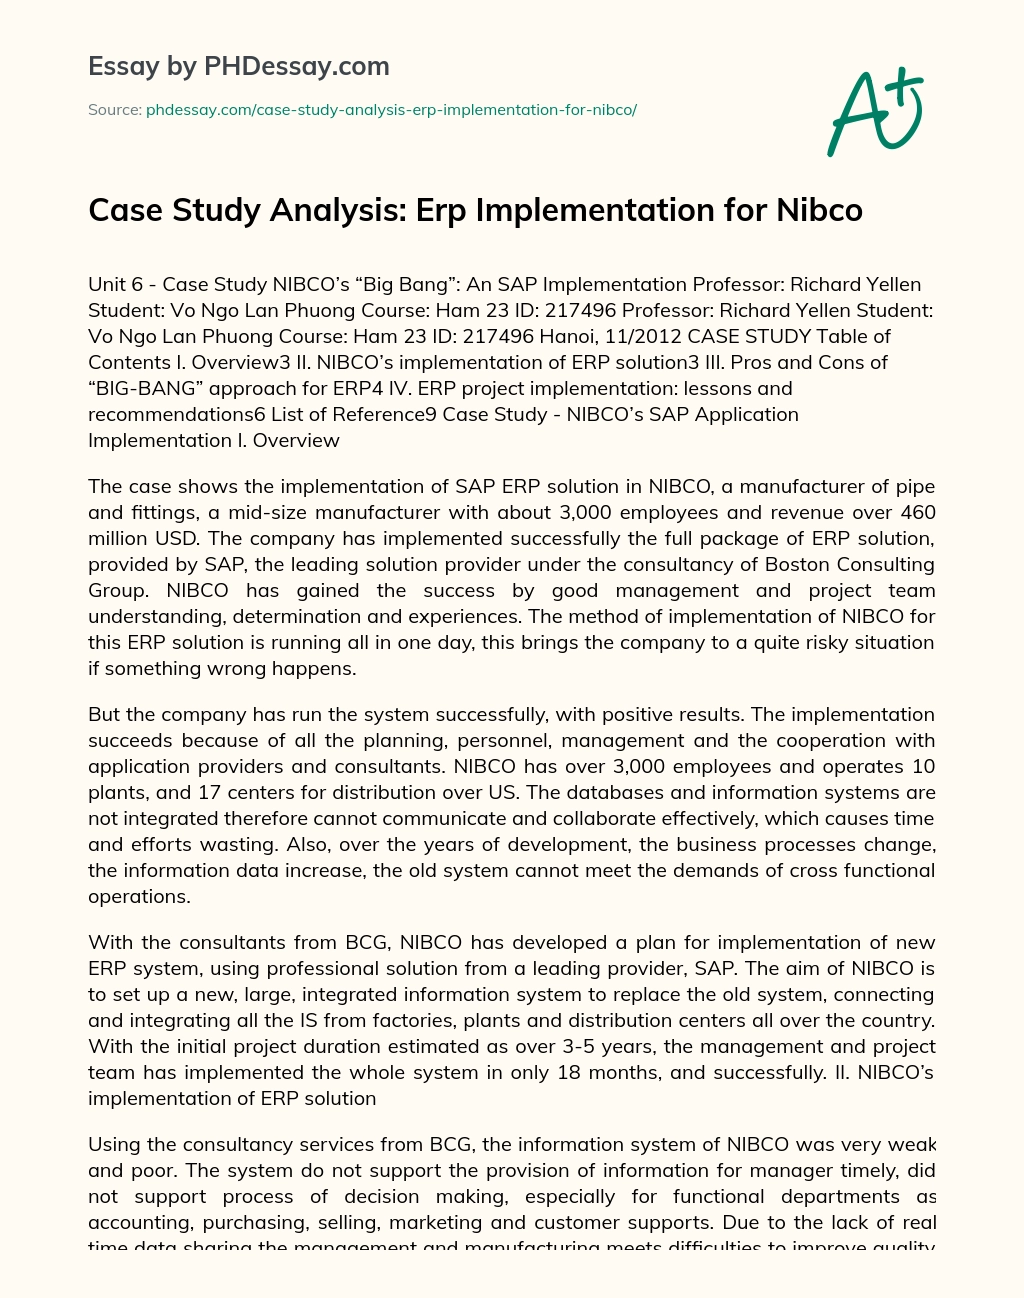 Case Study Analysis: Erp Implementation for Nibco essay